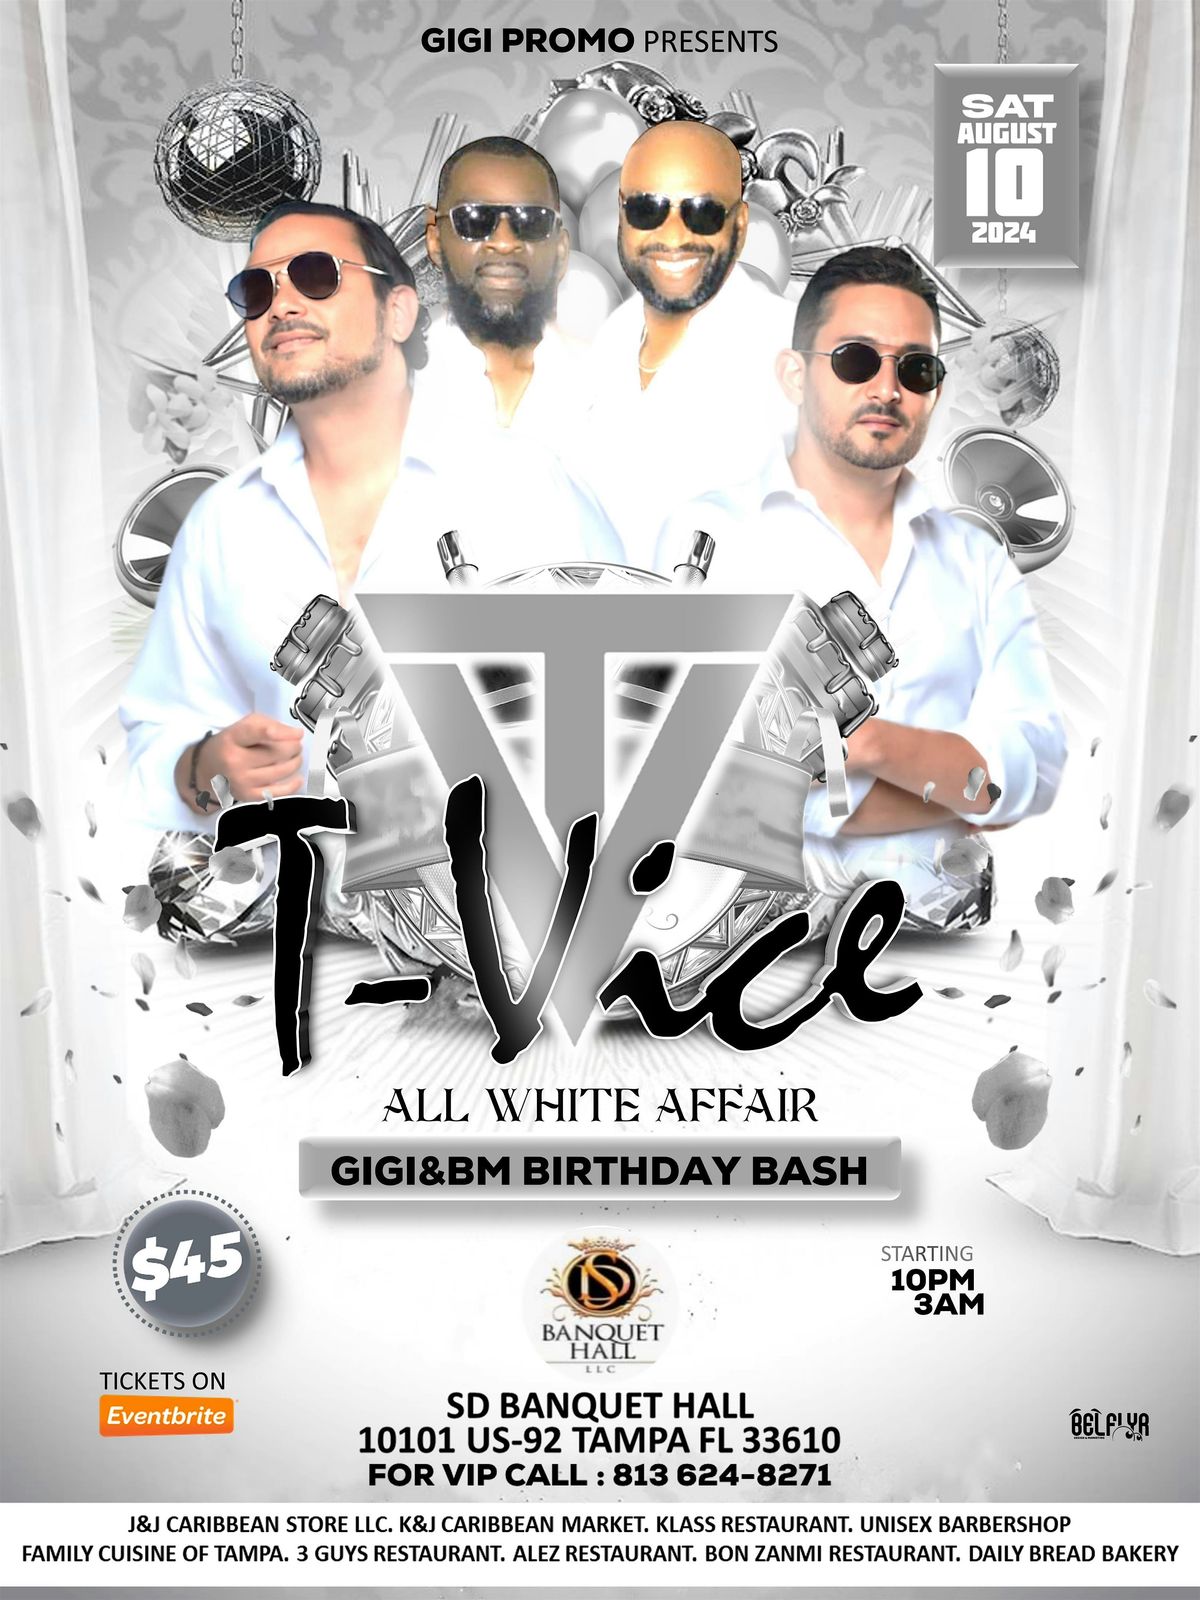 T-VICE LIVE IN TAMPA  ALL WHITE AFFAIR